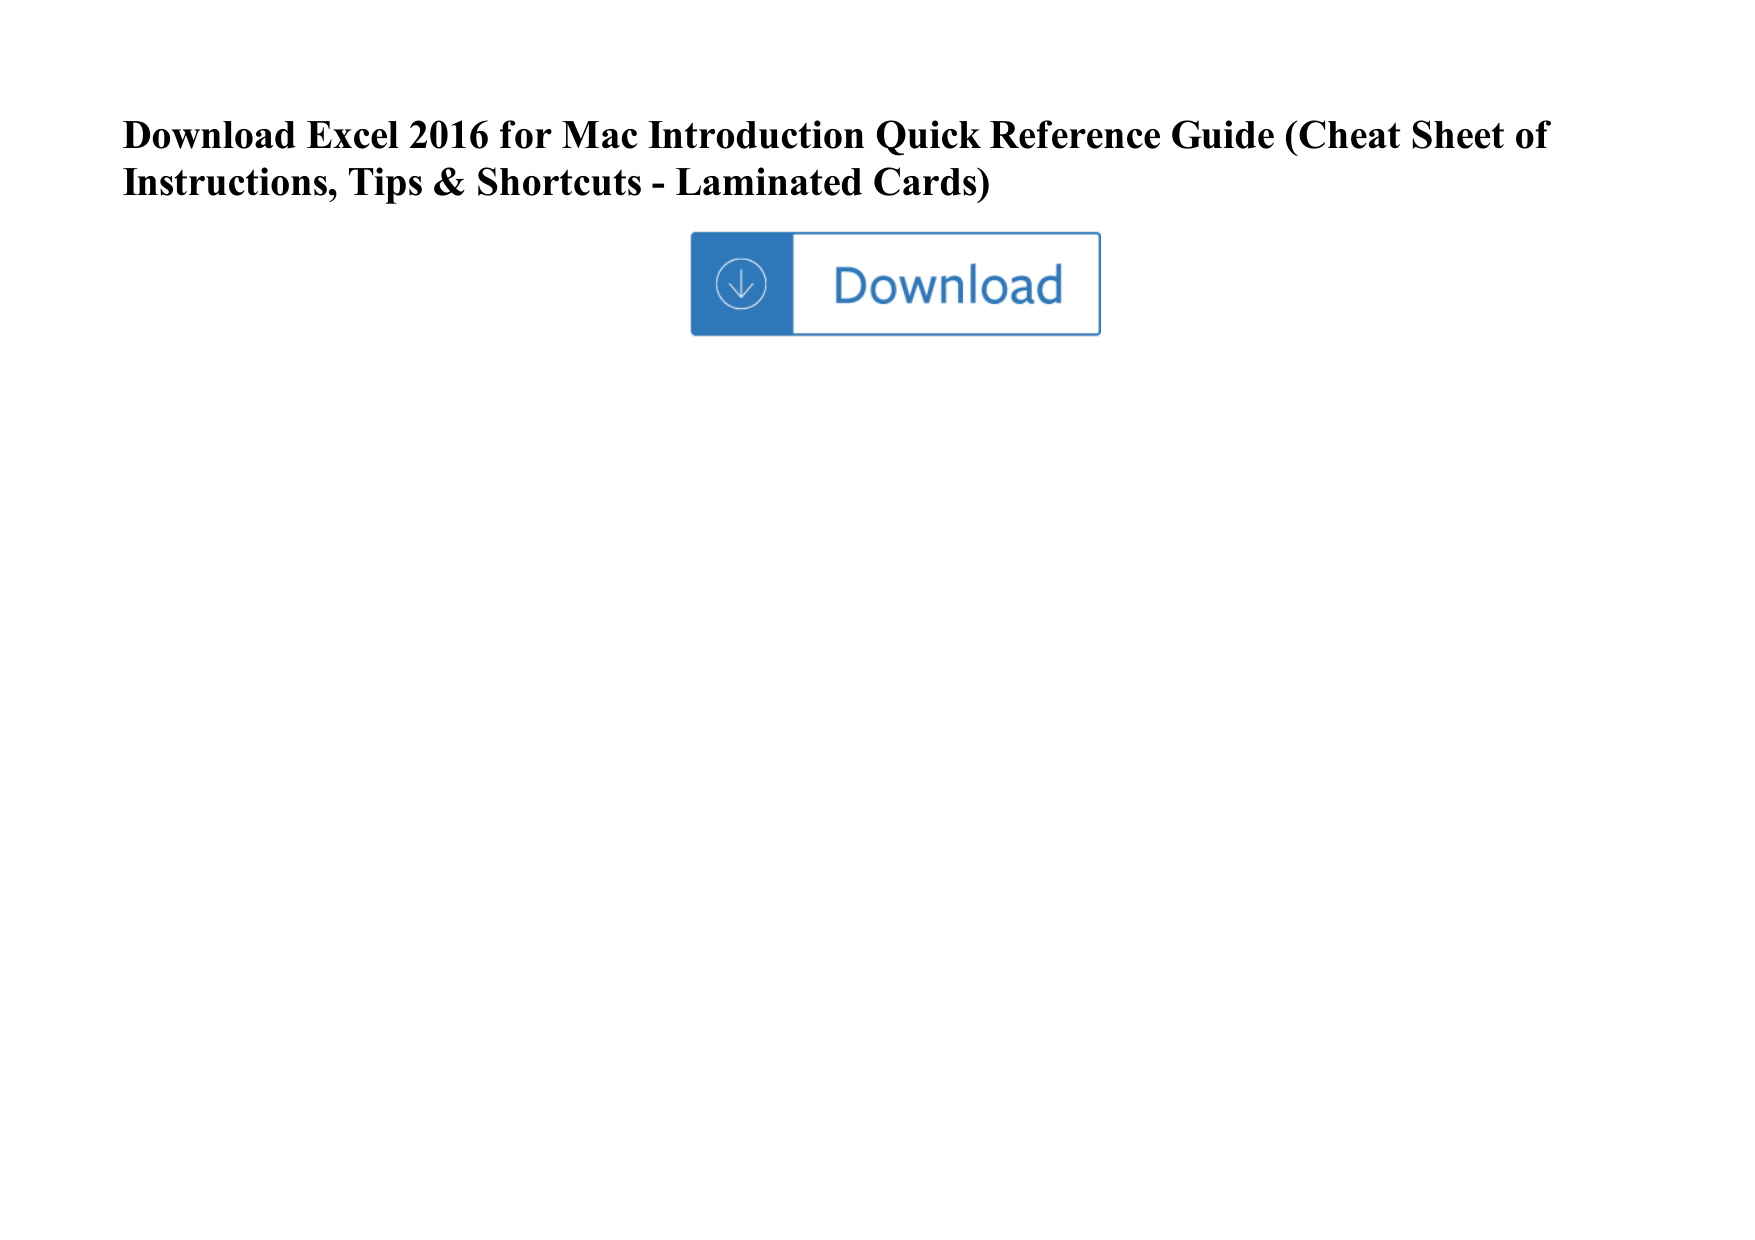 Page 1 of 1 - Excel 2016 For Mac Introduction Quick Reference Guide (Cheat Sheet Of Instructions, Tips & Shortcuts - Laminated Cards) Excel-2016-for-mac-introduction-quick-reference-guide-cheat-sheet-of-instructions-tips-shortcuts-laminated-cards